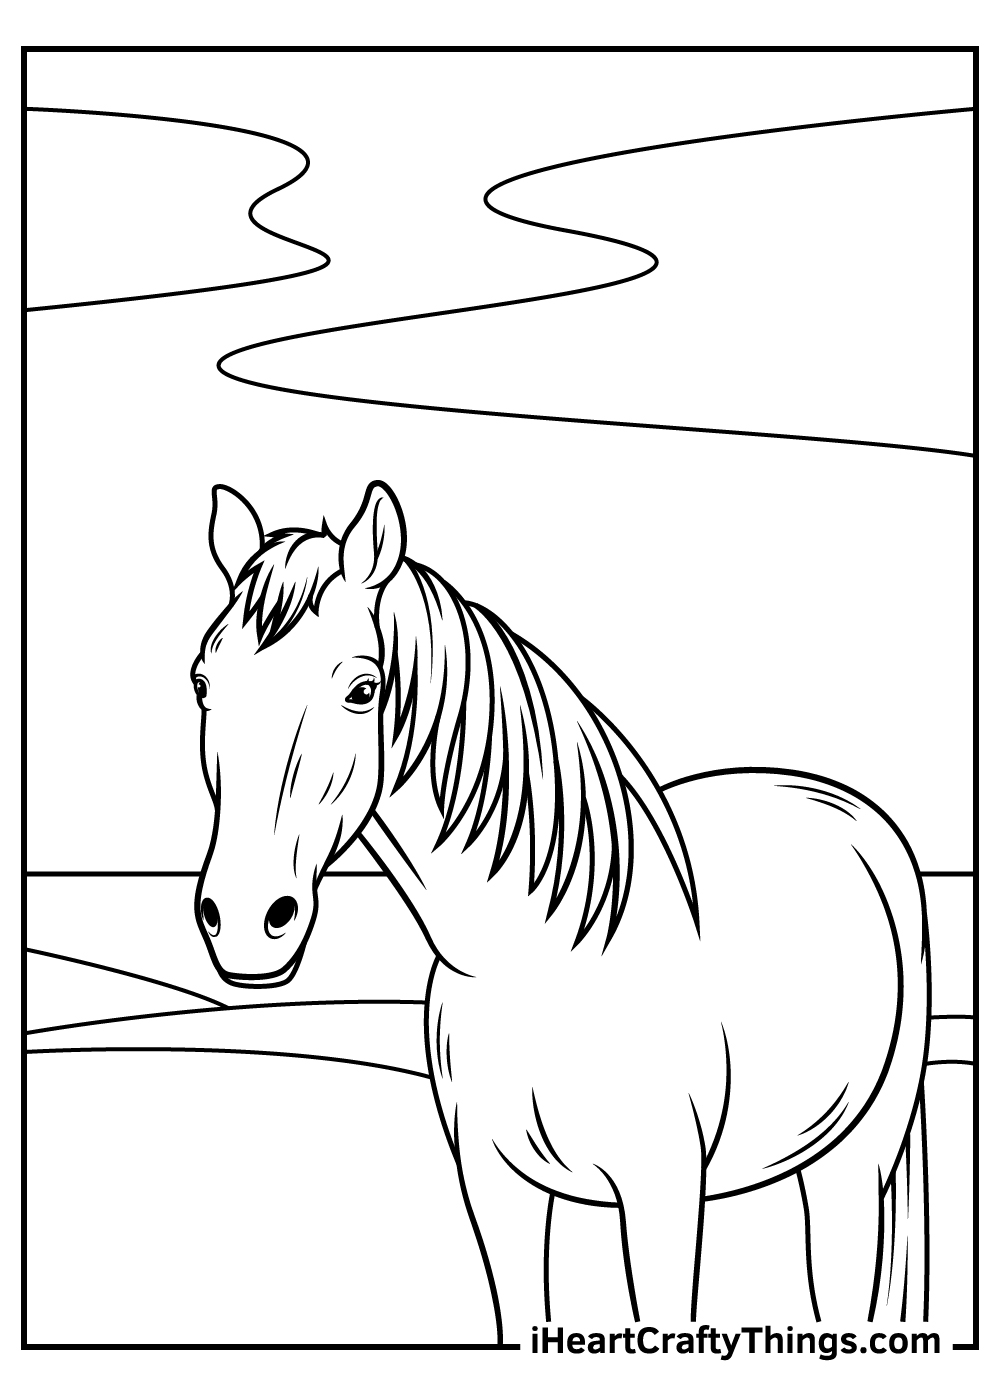 Realistic horse coloring pages updated